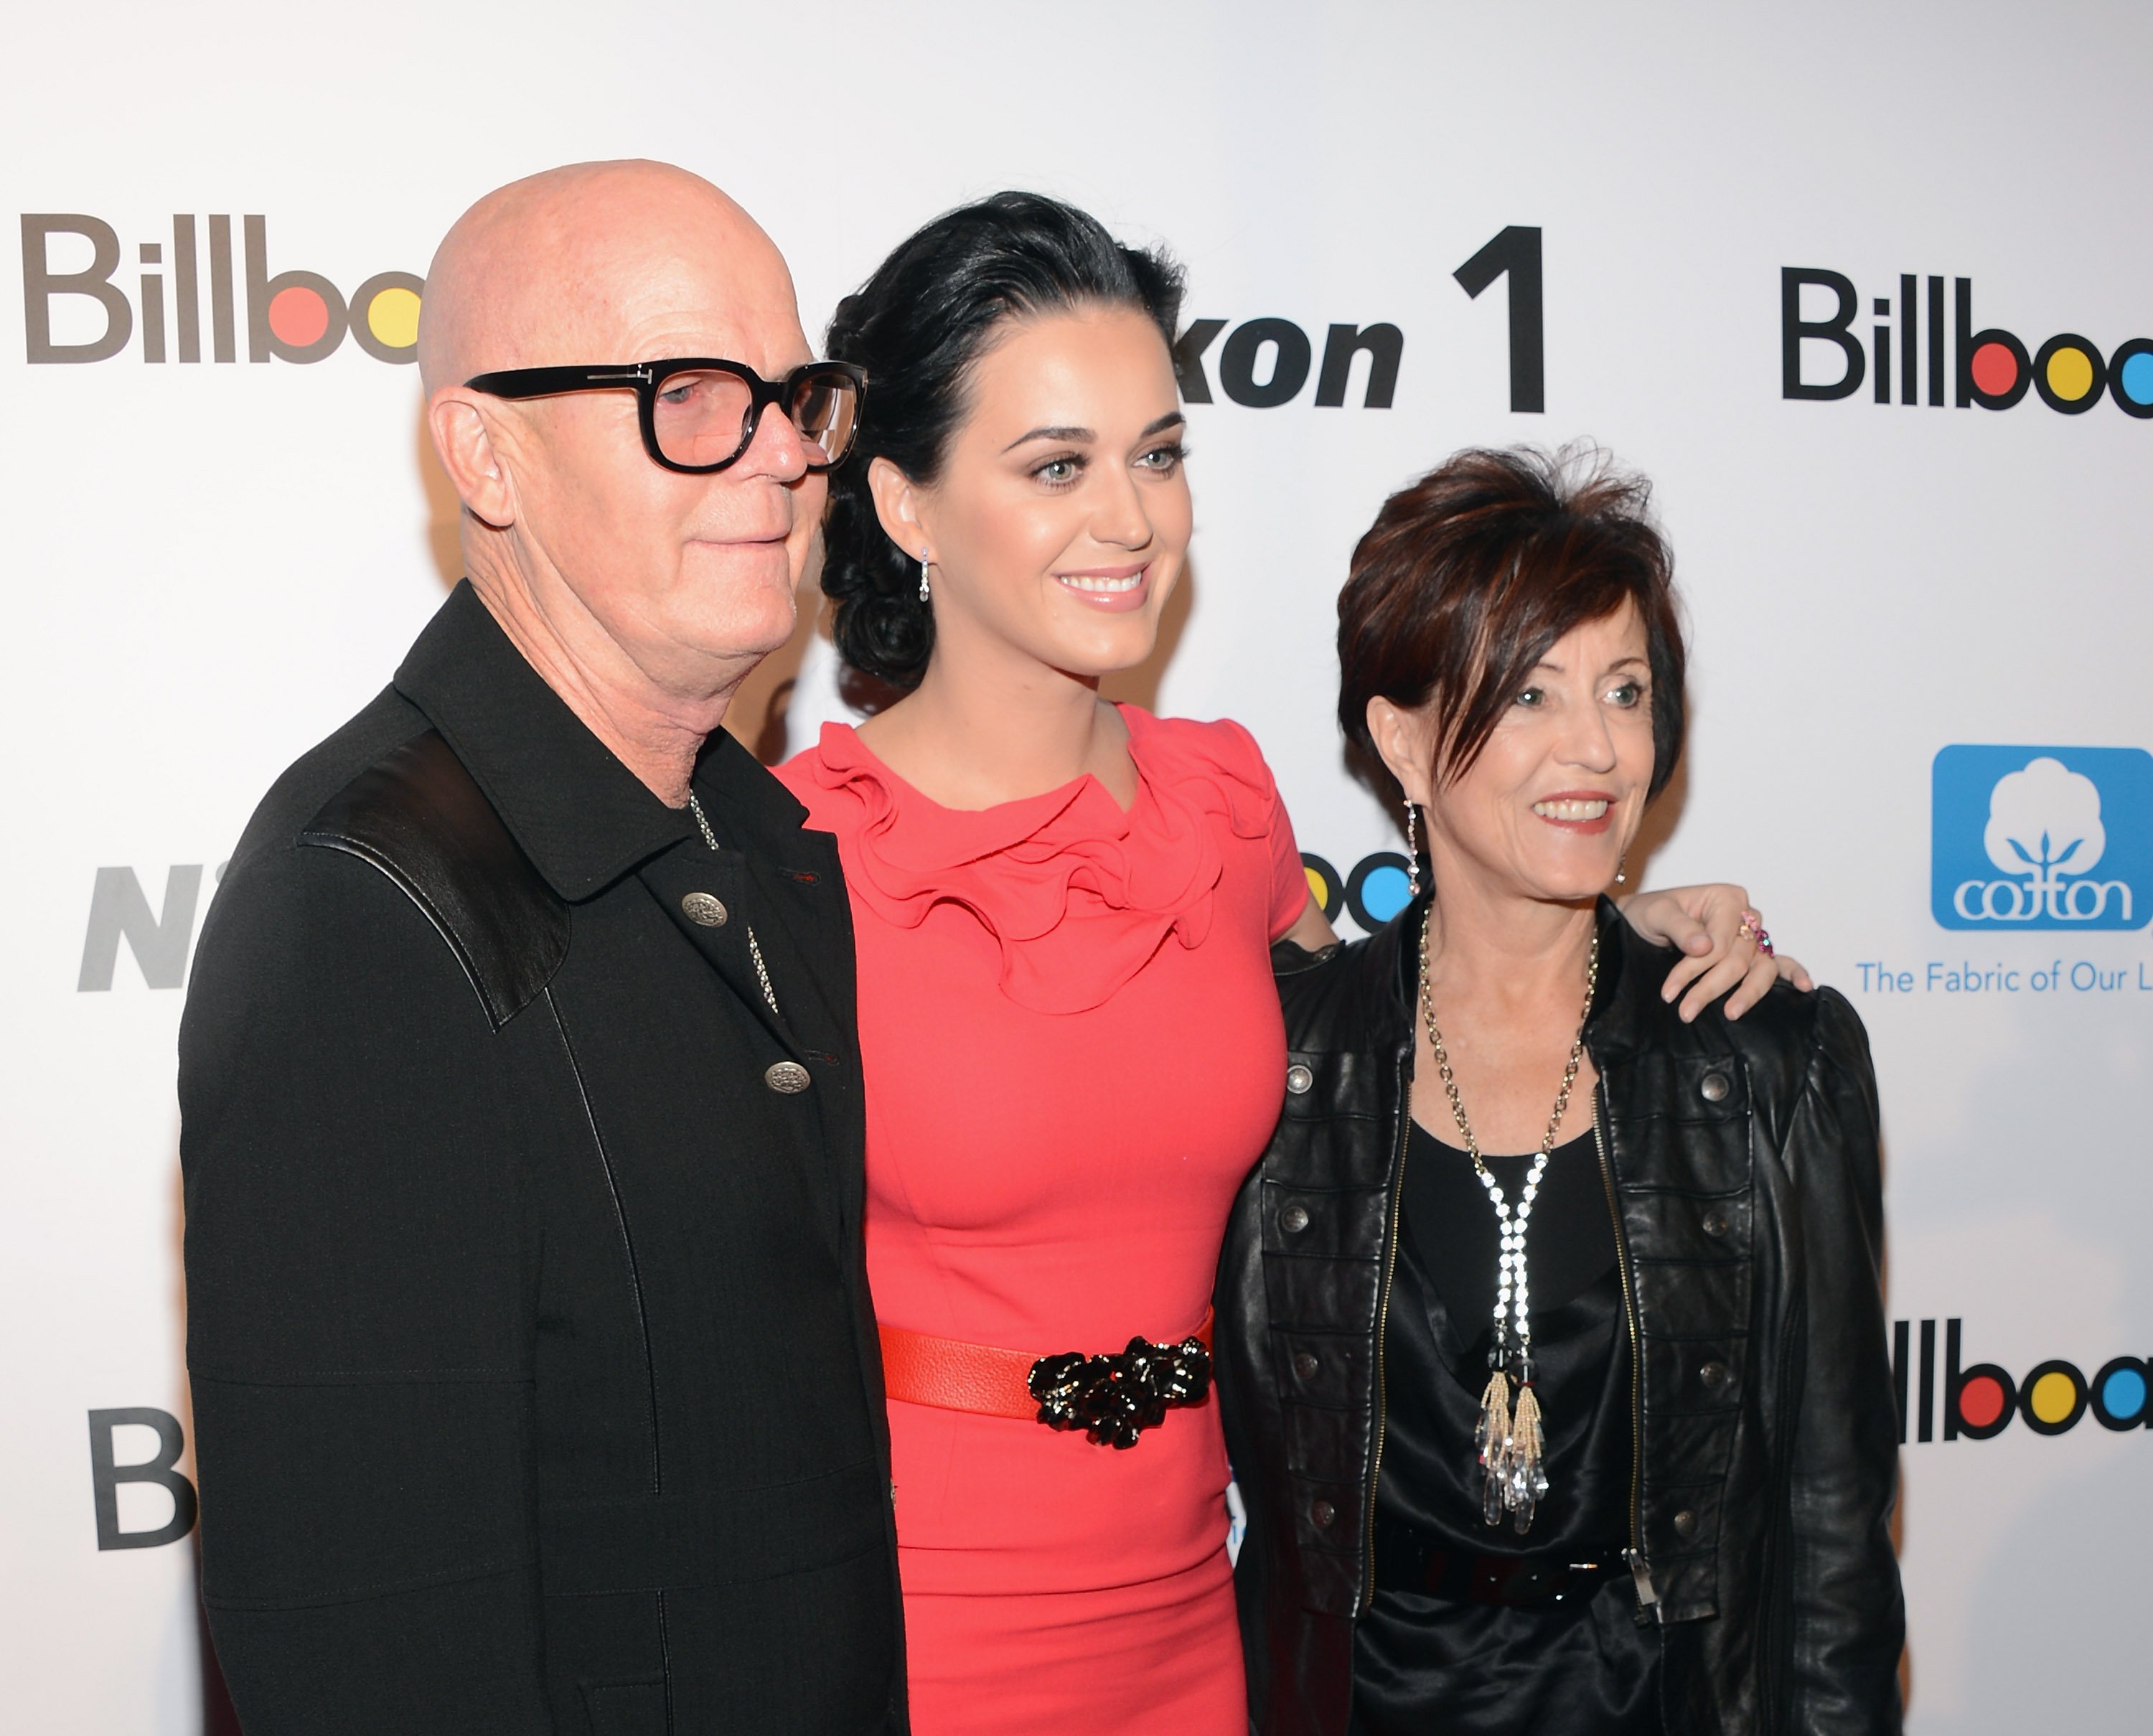 Katy Perry (center) with her father (left), Keith Hudson and mother (right) Mary Hudson in 2012